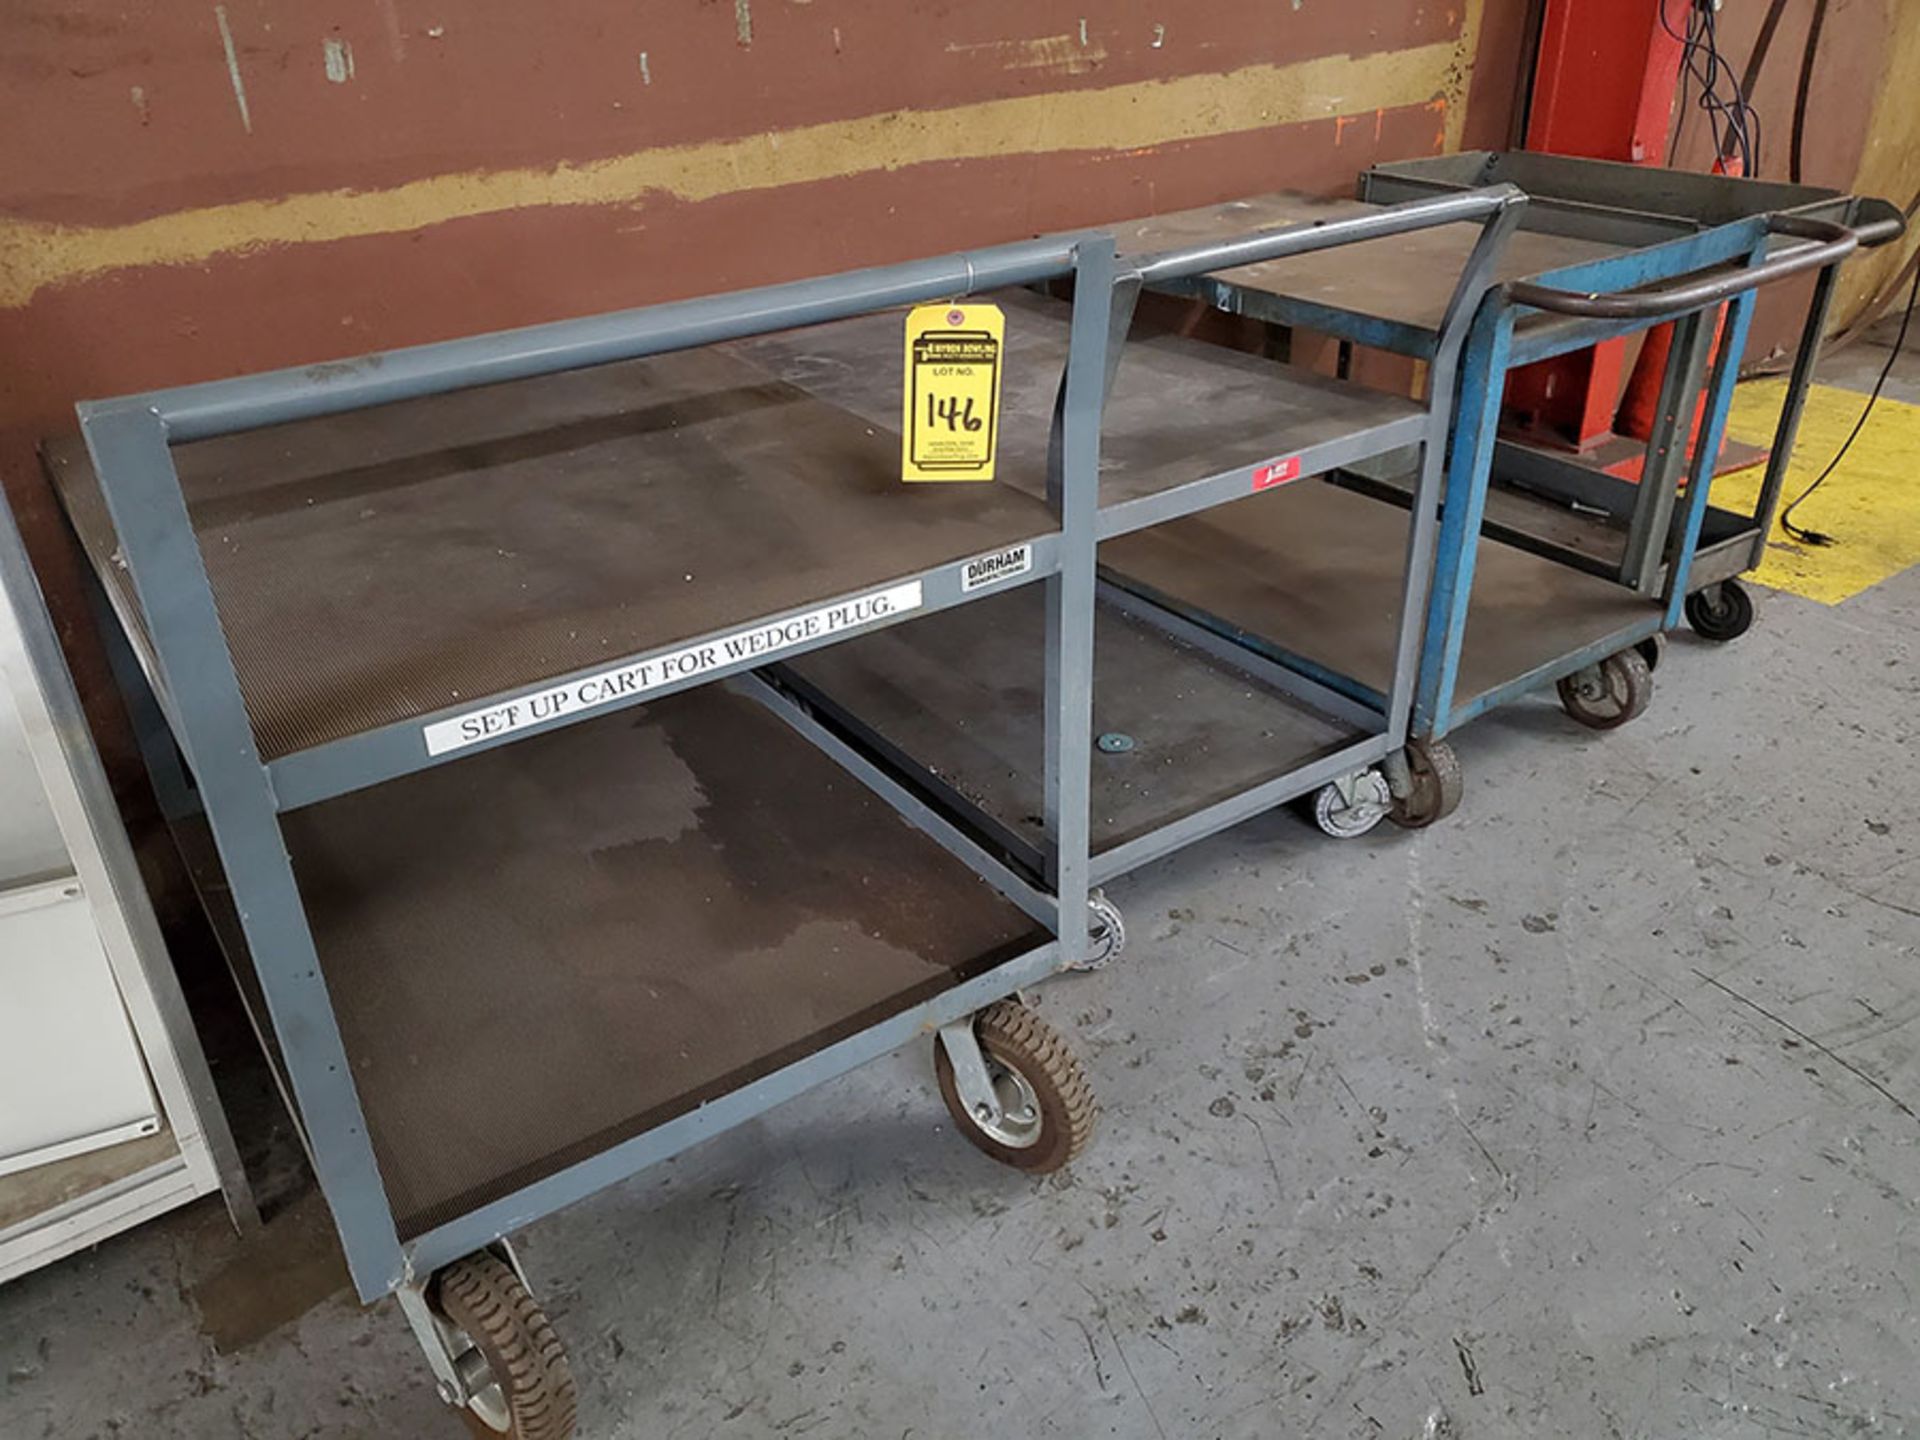 (10+) METAL AND PLASTIC SHOP CARTS, ASSORTED SIZES - Image 6 of 9